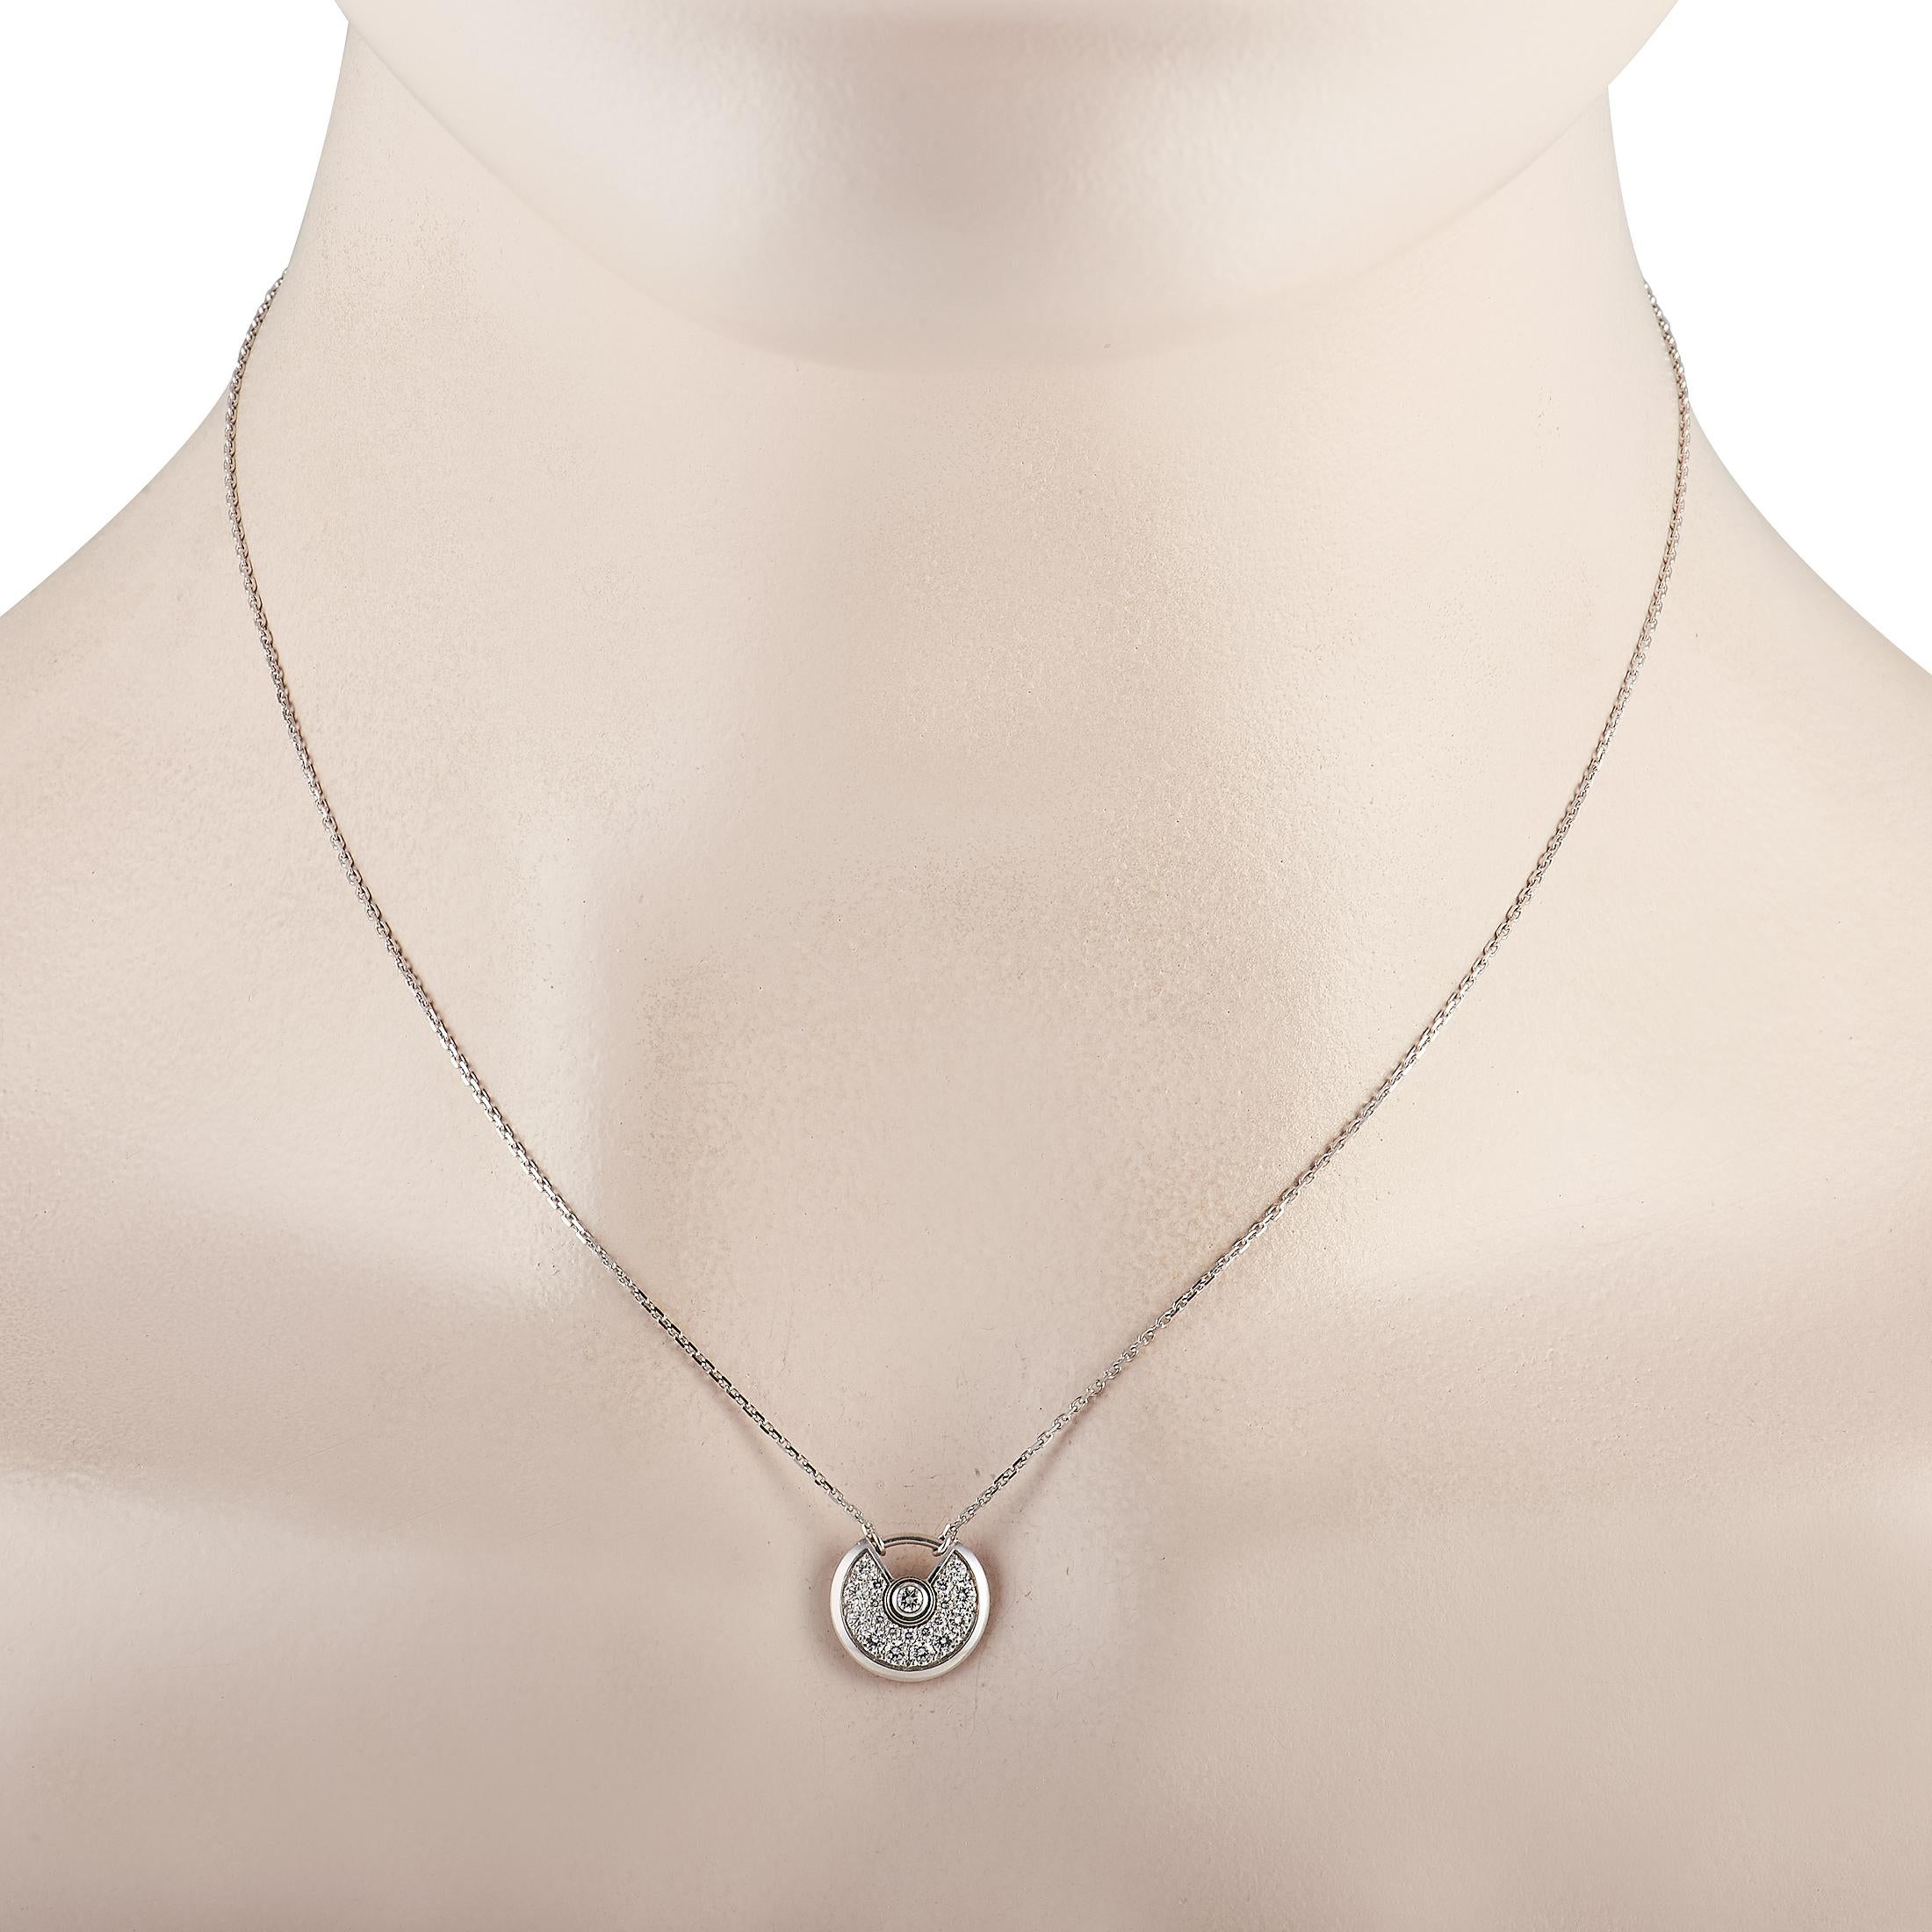 Like all pieces from the Cartier Amulette de Cartier collection, a padlocked-shaped pendant serves as a stunning focal point on this necklace. Suspended at the center of a delicate 16” chain, this piece’s 18K White Gold pendant measures 0.5” round